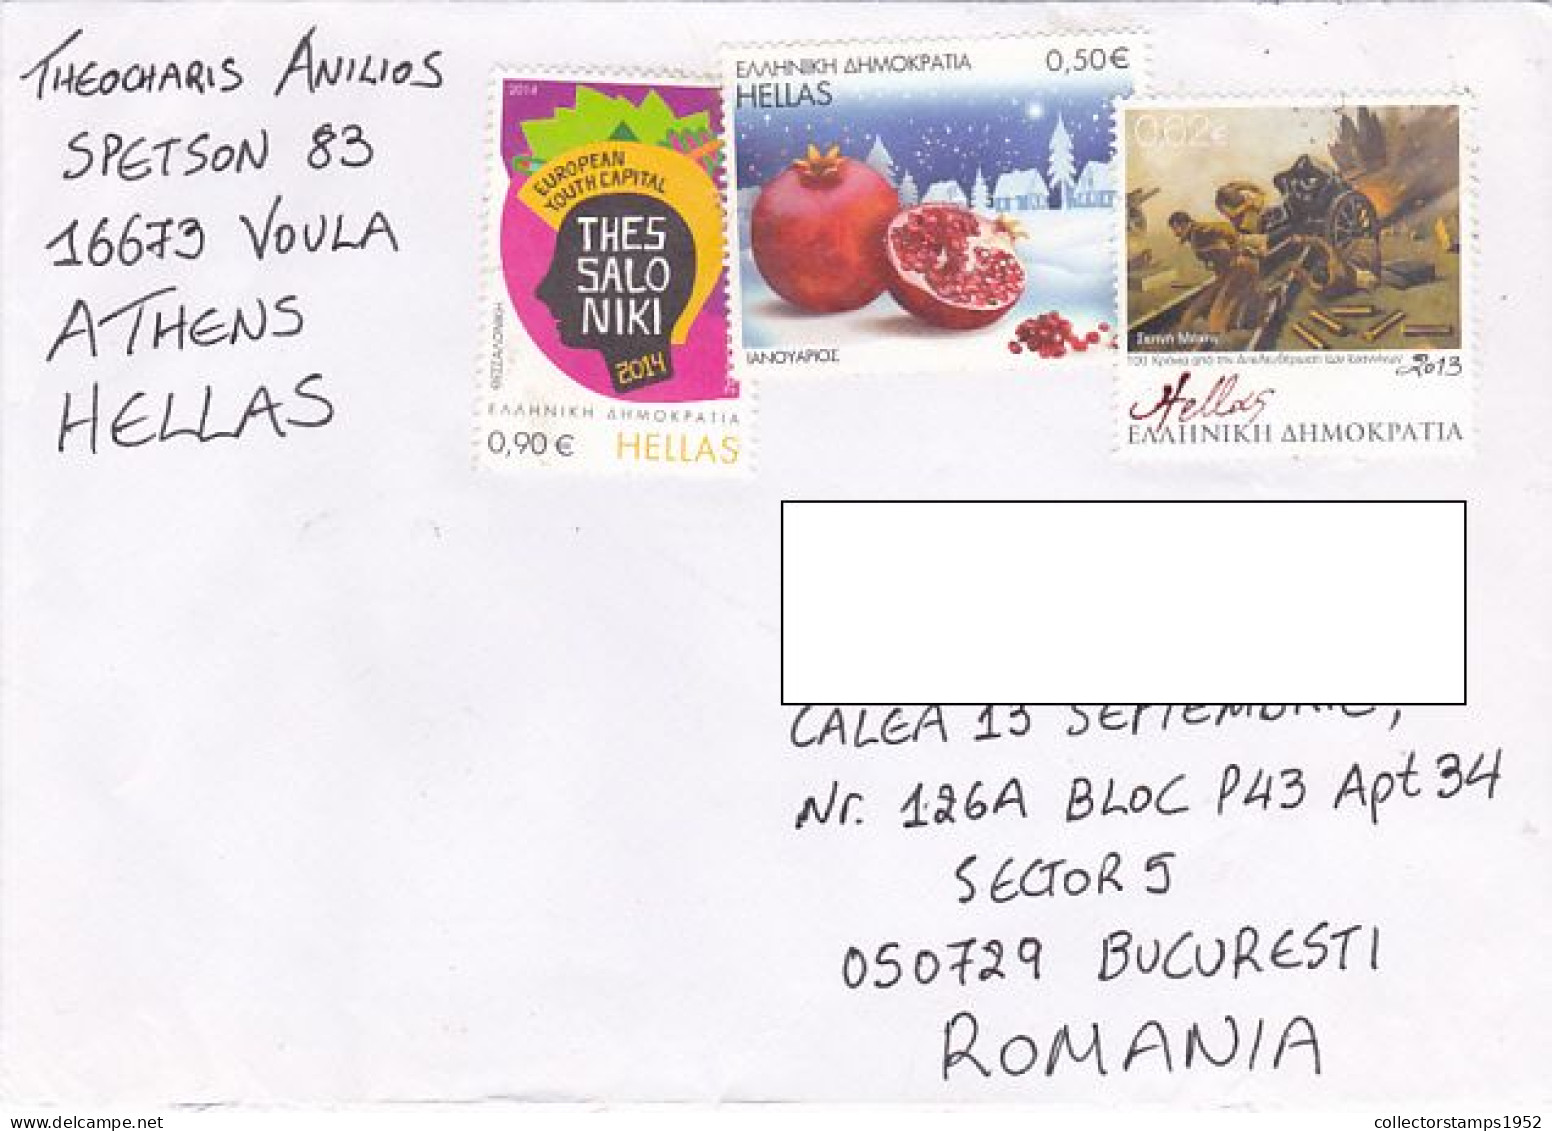 EUROPEAN YOUTH CAPITAL, POMEGRANATE, IOANNINA LIBERATION, STAMPS ON COVER, 2022, GREECE - Covers & Documents